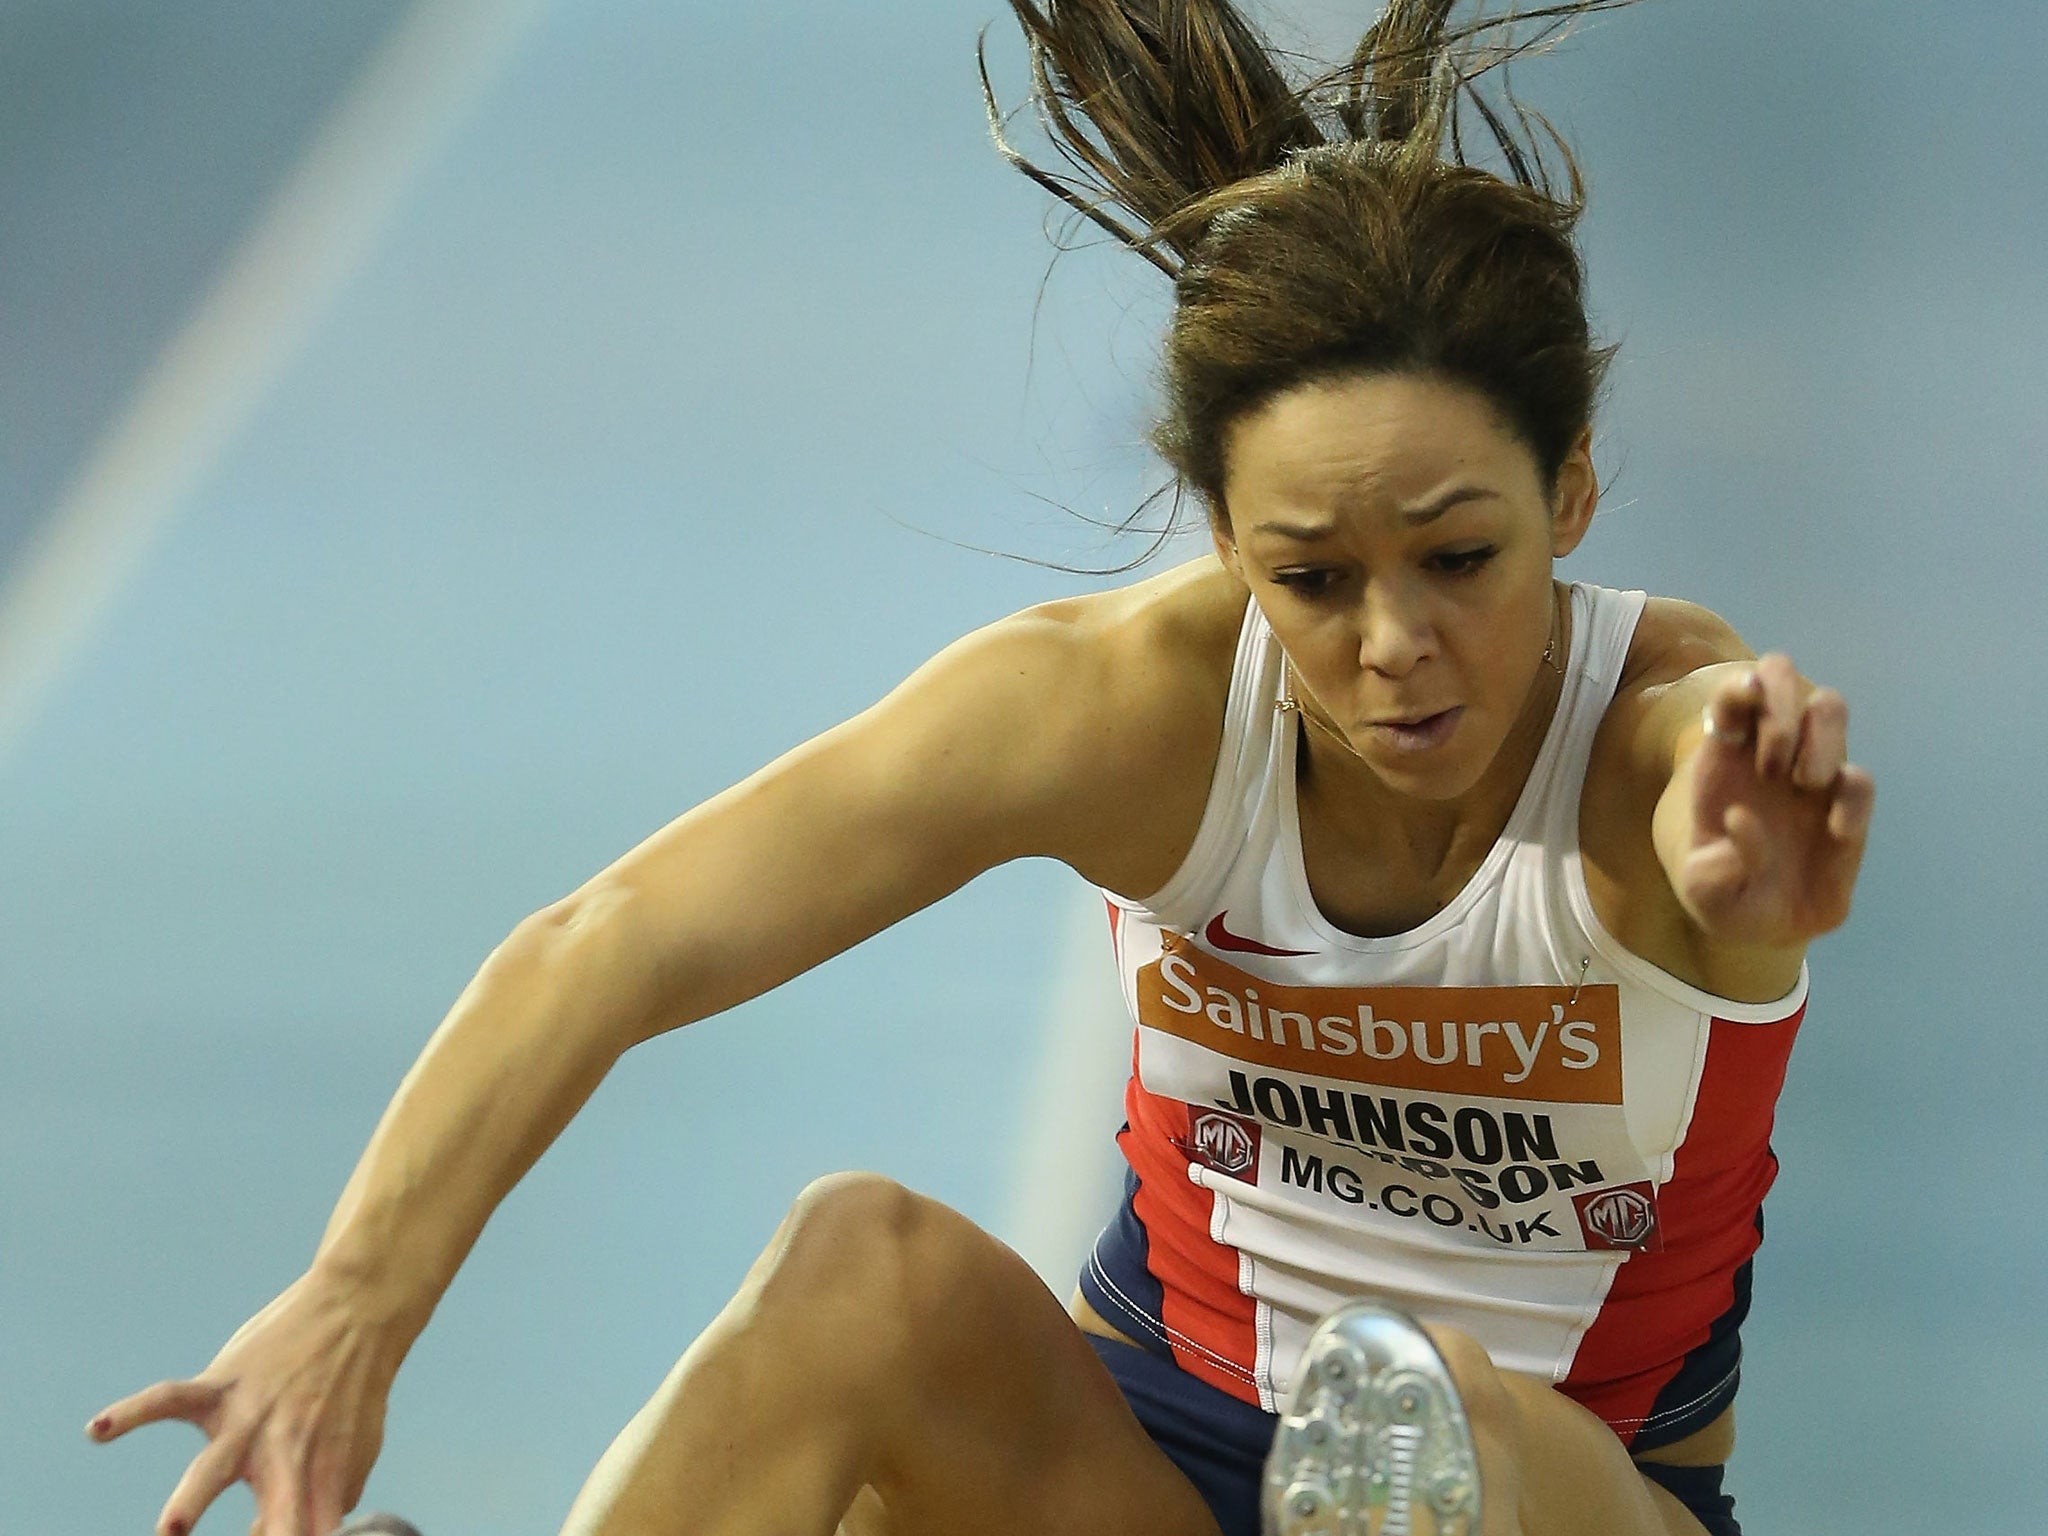 Katarina Johnson-Thompson won the European Indoors in March but has struggled with injuries